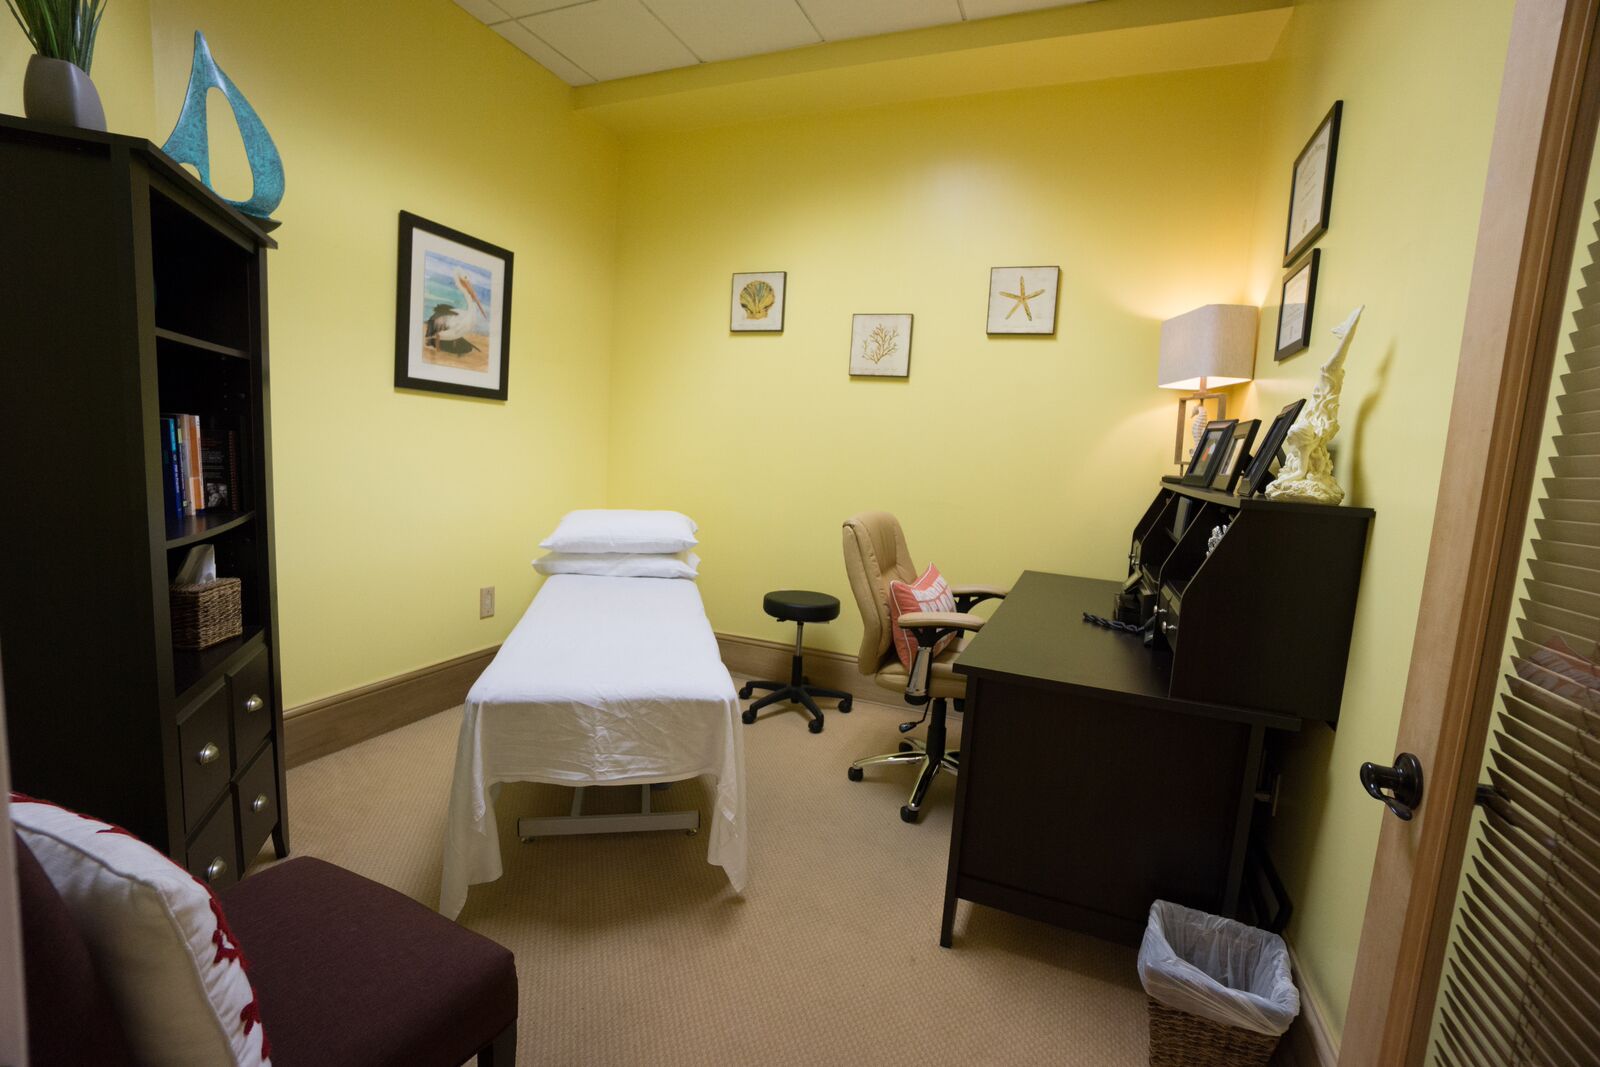 Saylor Physical Therapy - Palm Beach